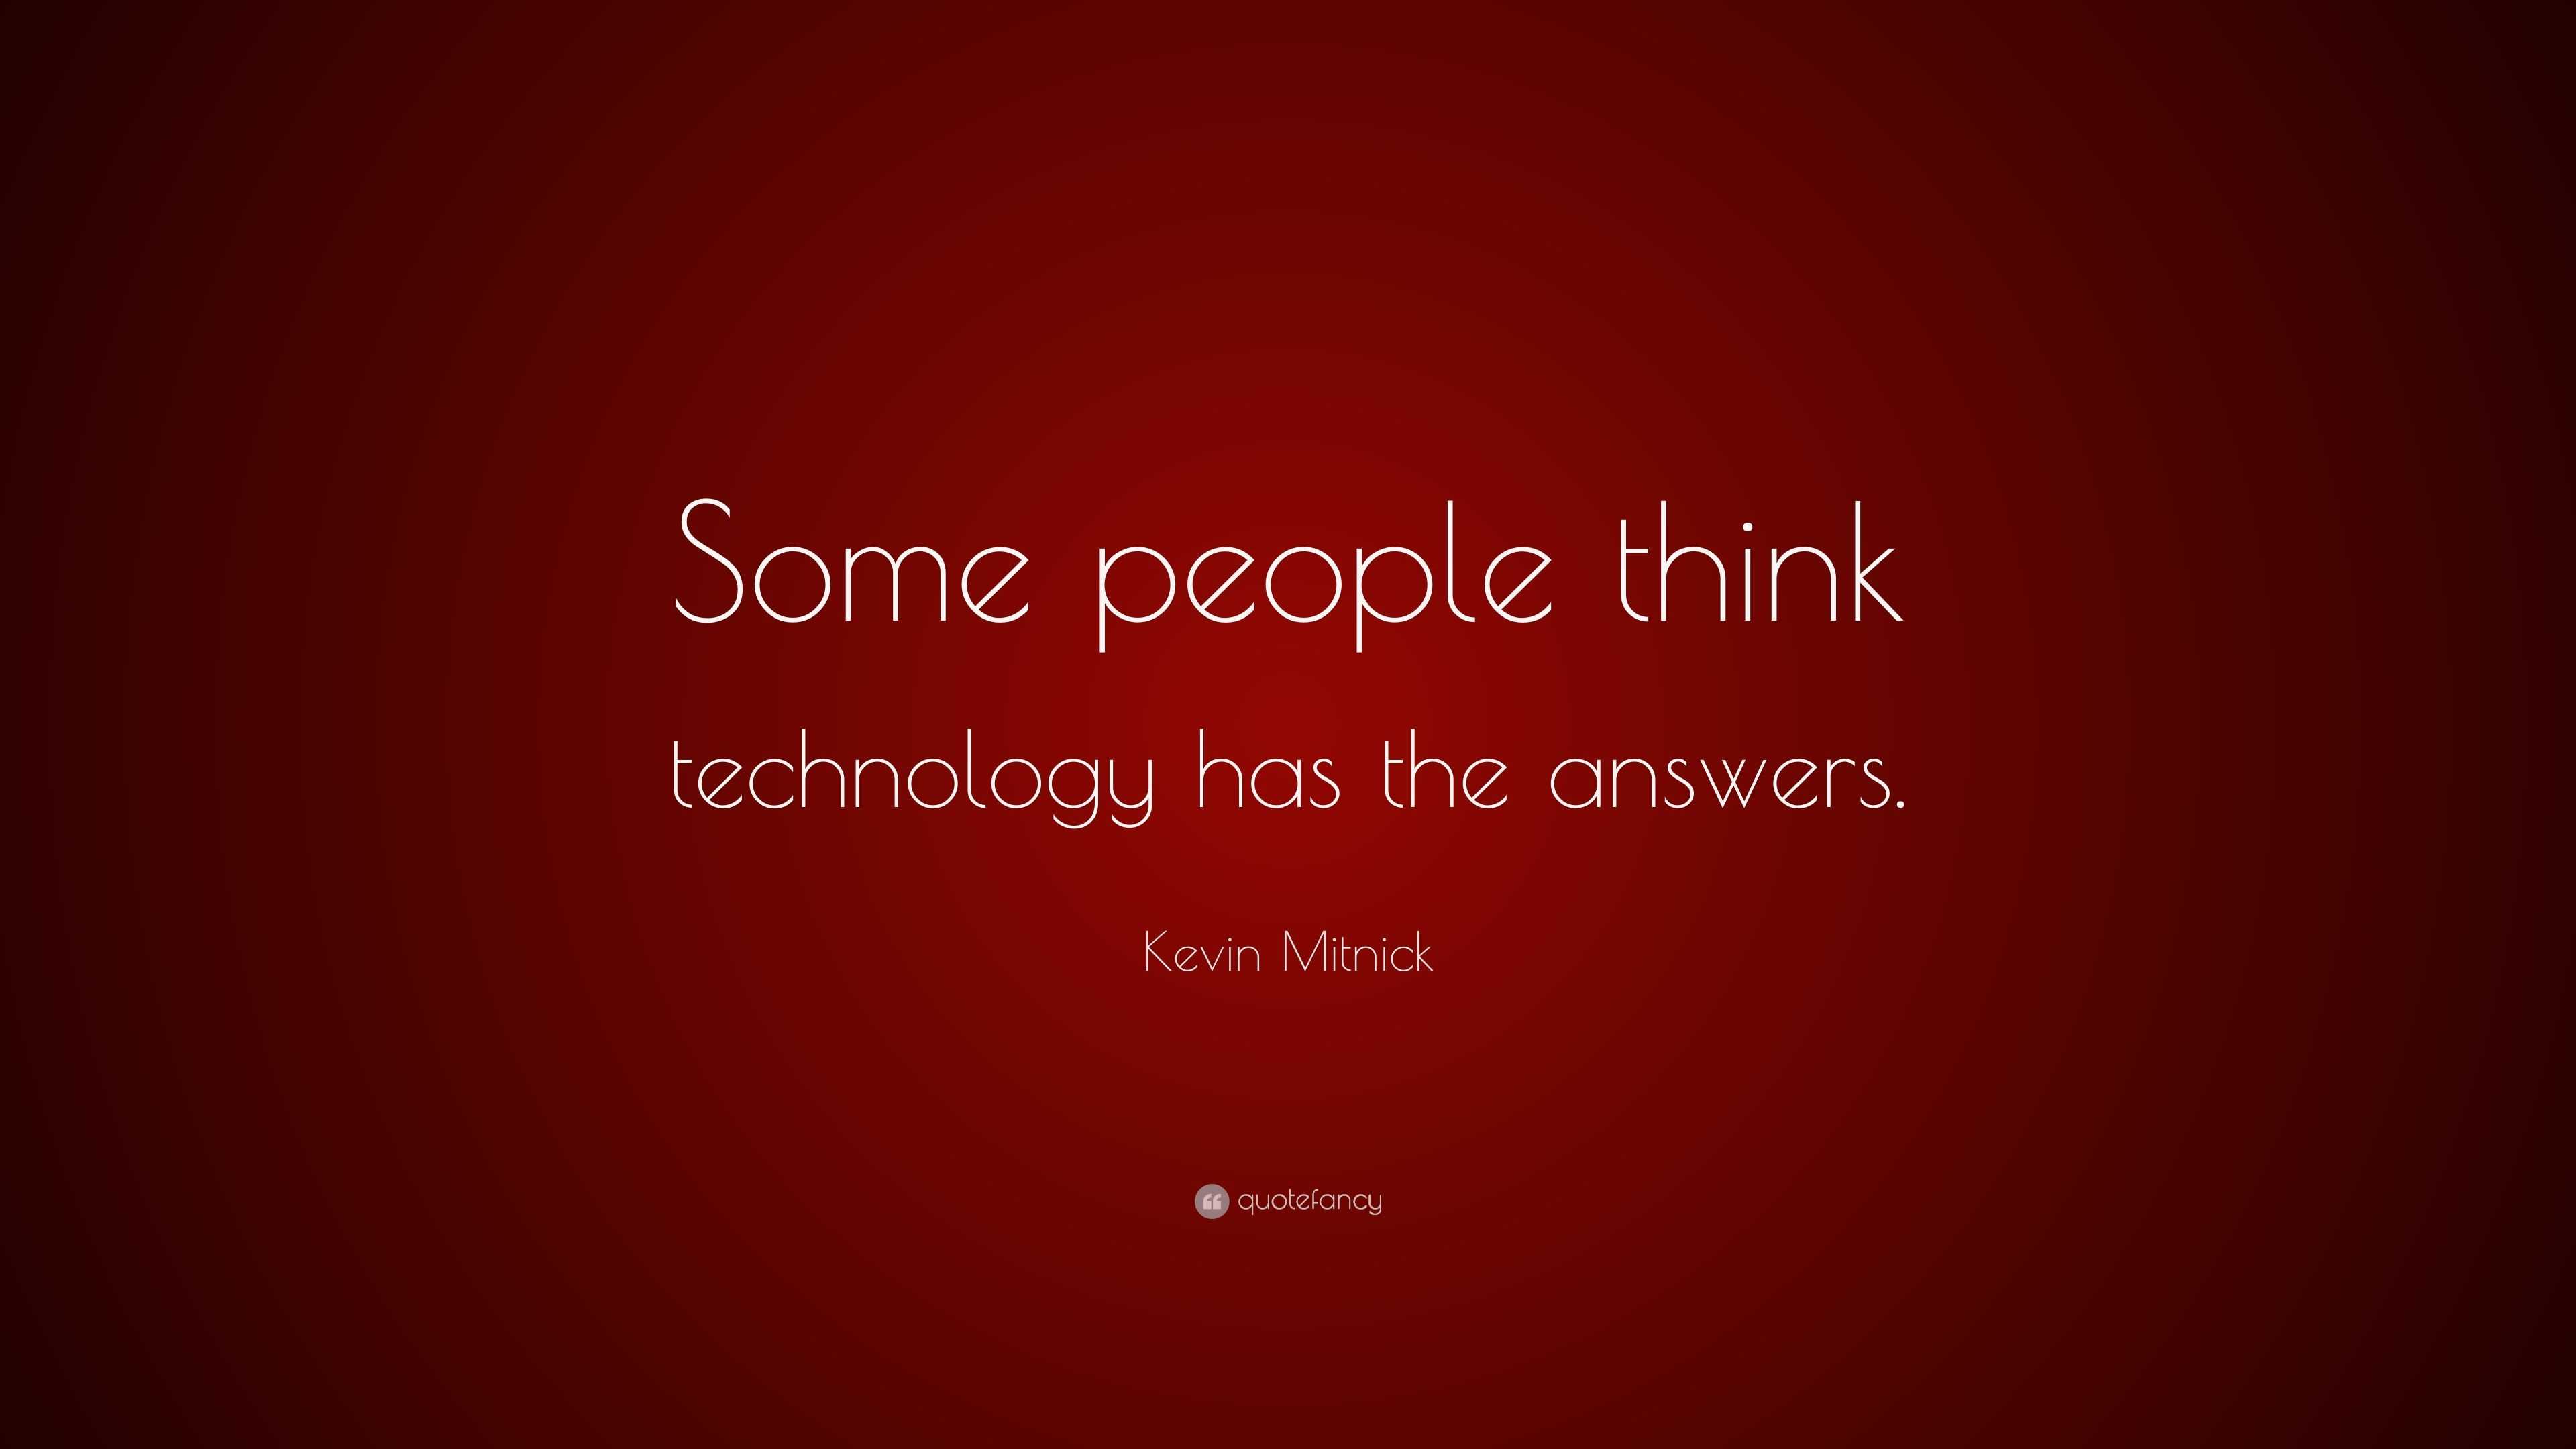 Kevin Mitnick Quote: “Some people think technology has the answers.”